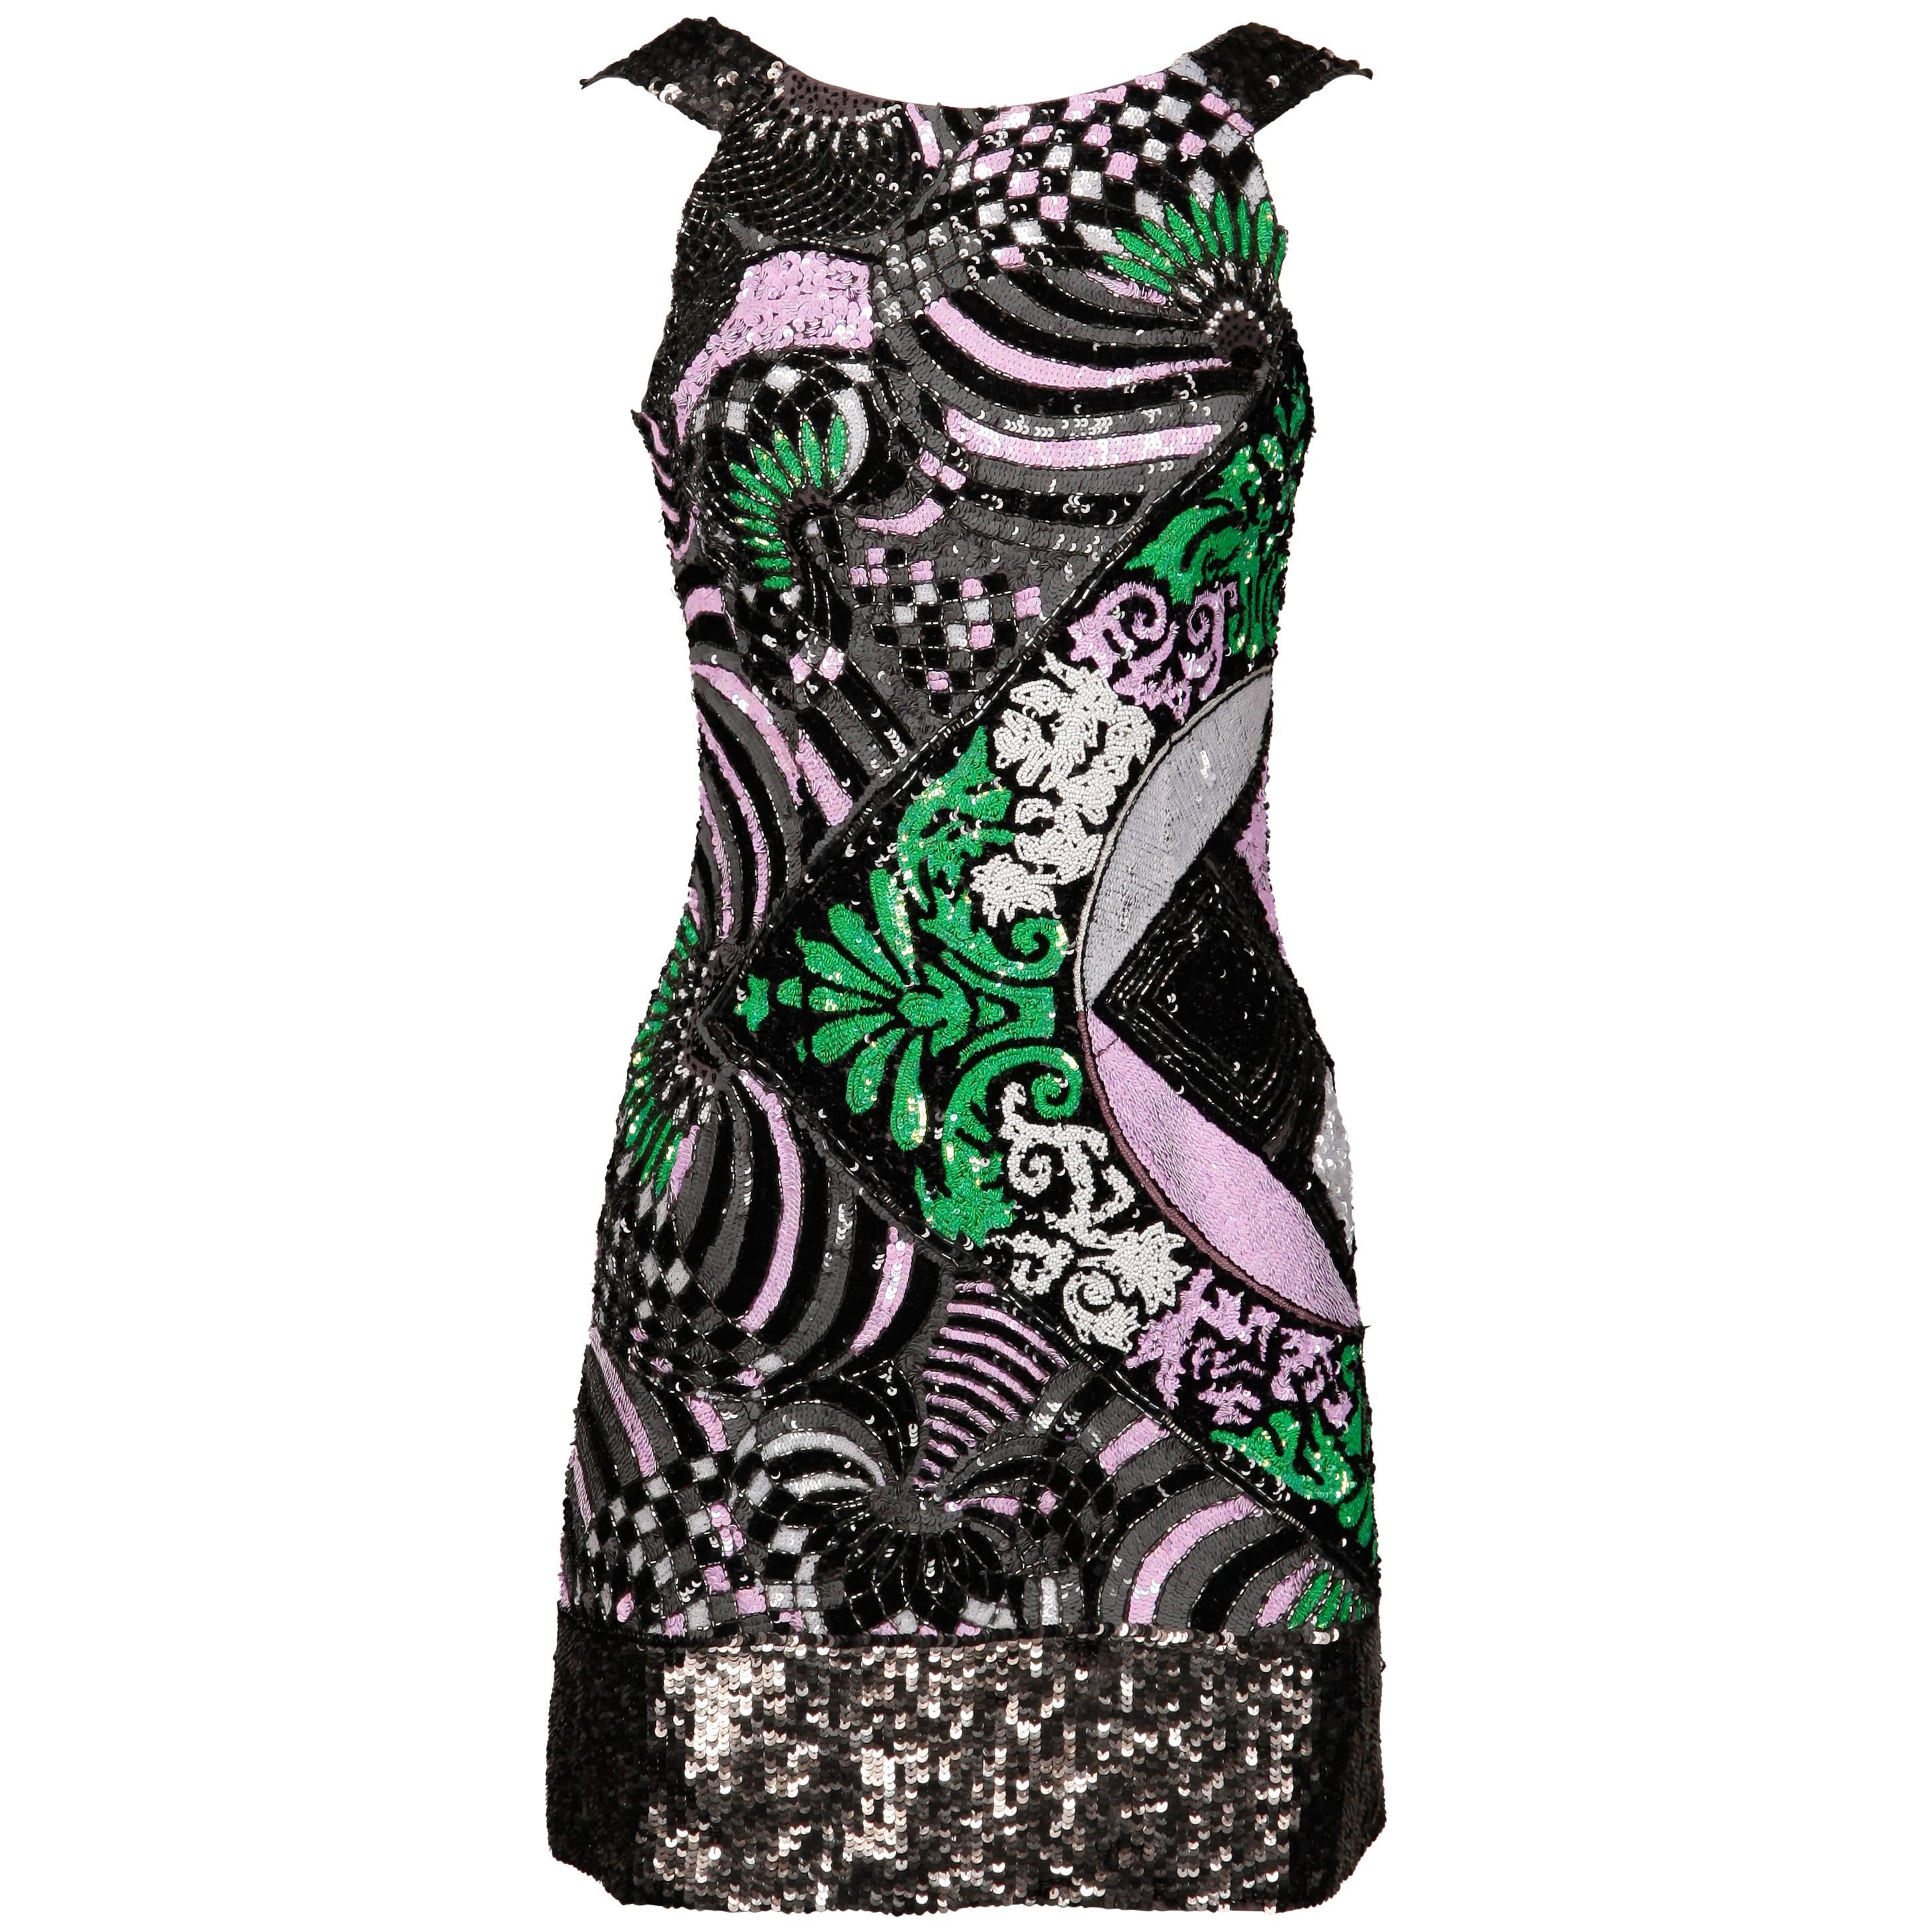 Versace Heavily Beaded + Sequin Dress with Open Cut Out Back